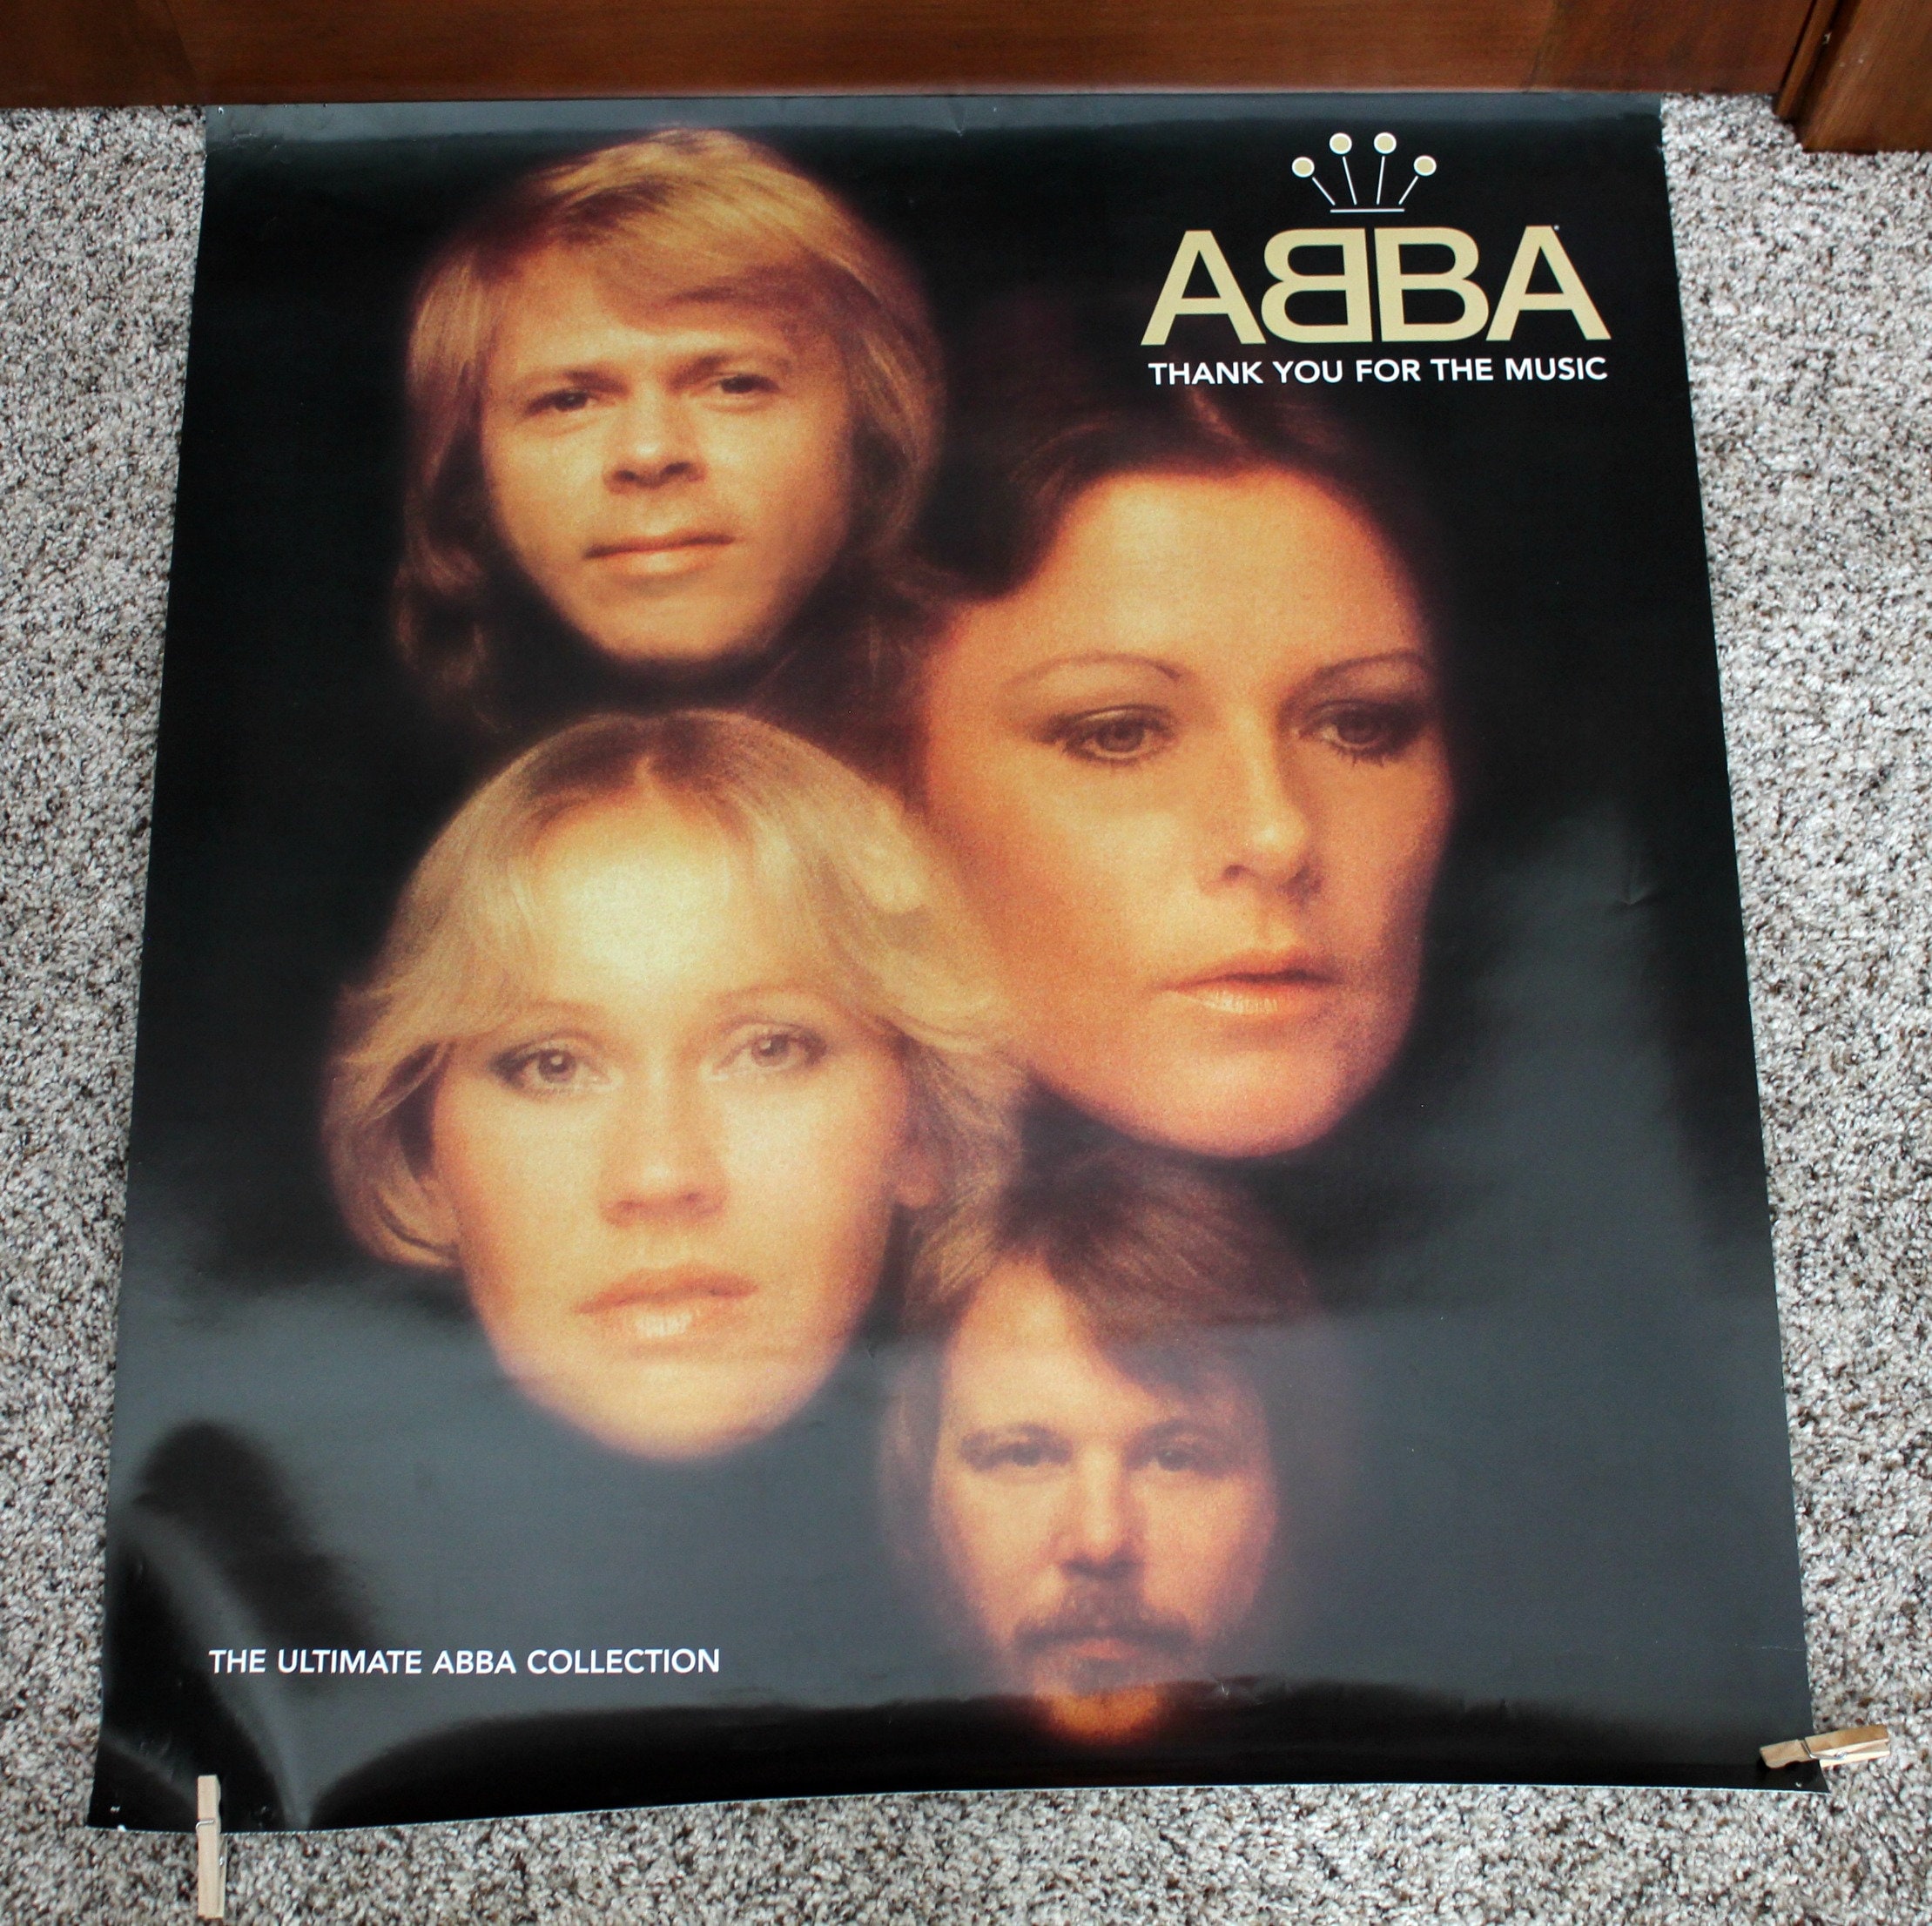 Vintage Abba Poster The Ultimate Abba Collection Thank You For The Music 1980s